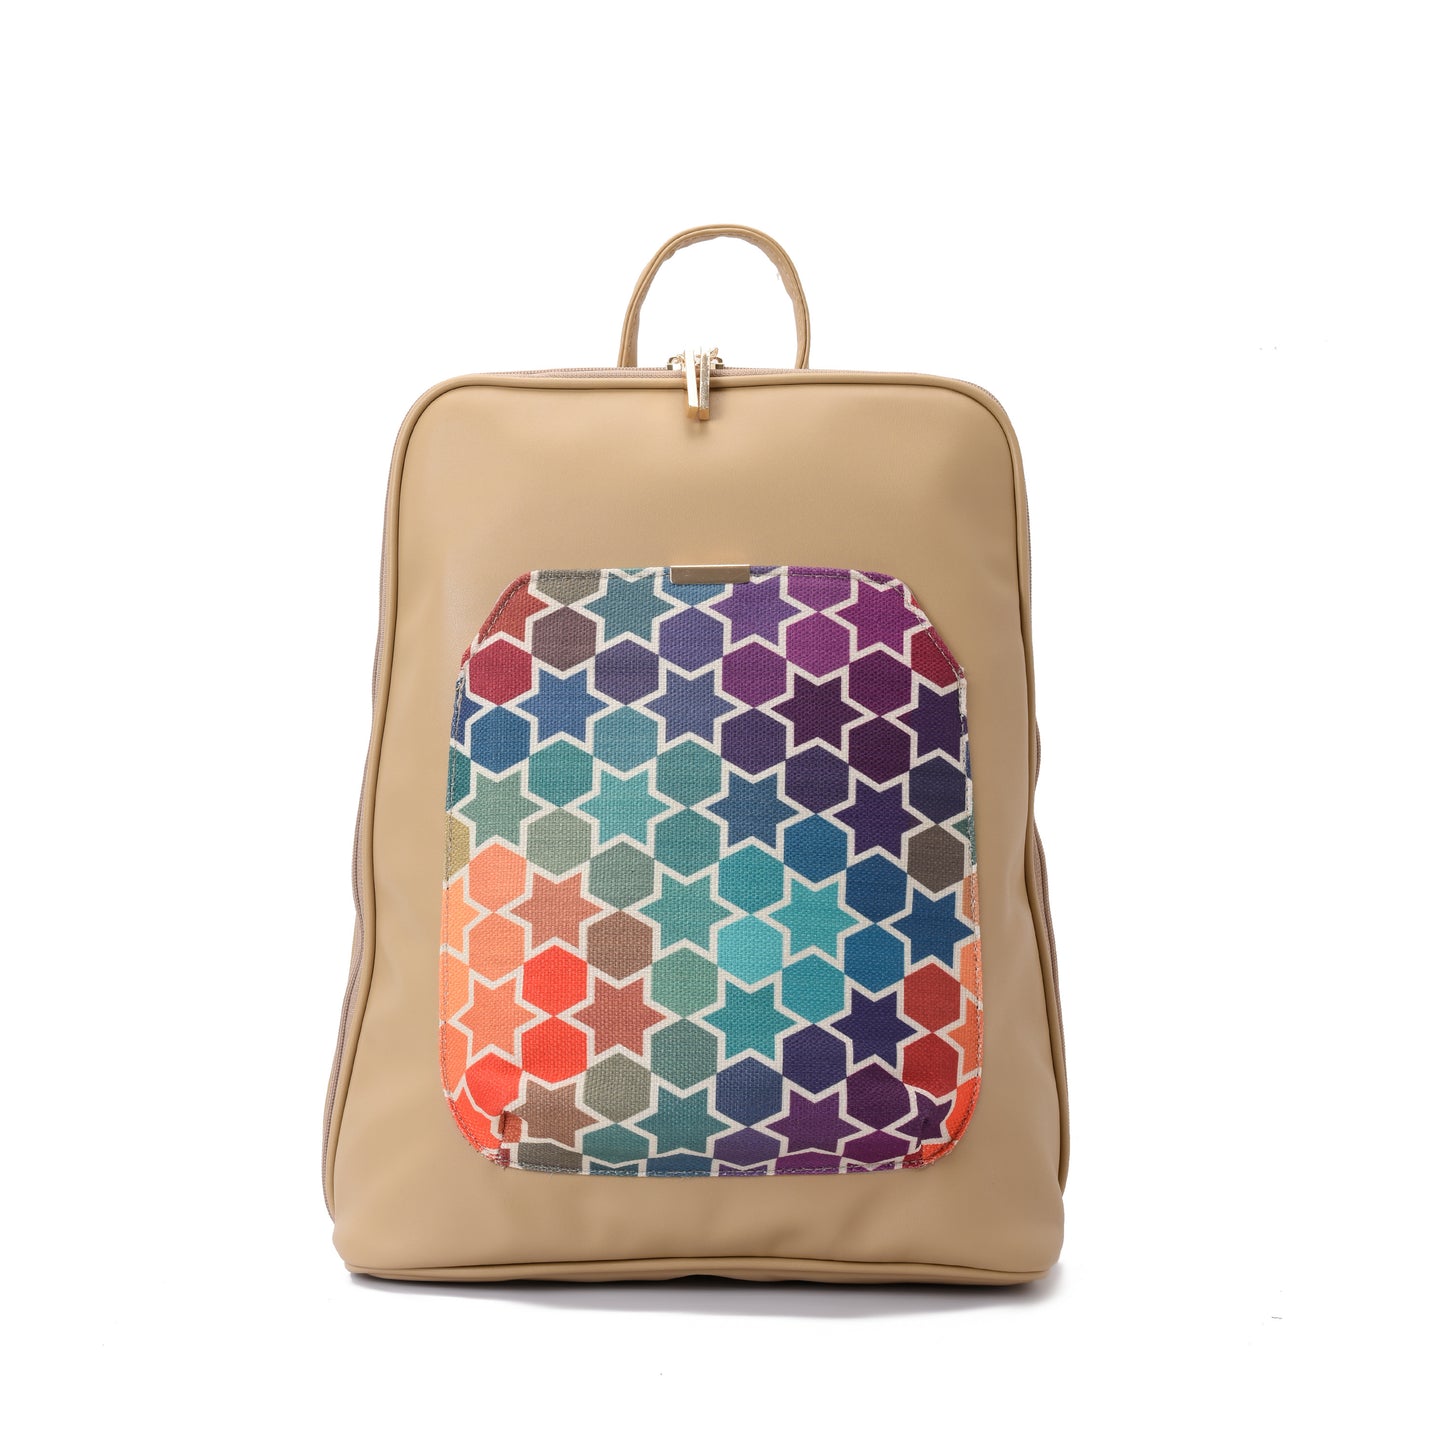 Laptop Beige with Colorful stars fabric Backpack/Cross - Code 2006